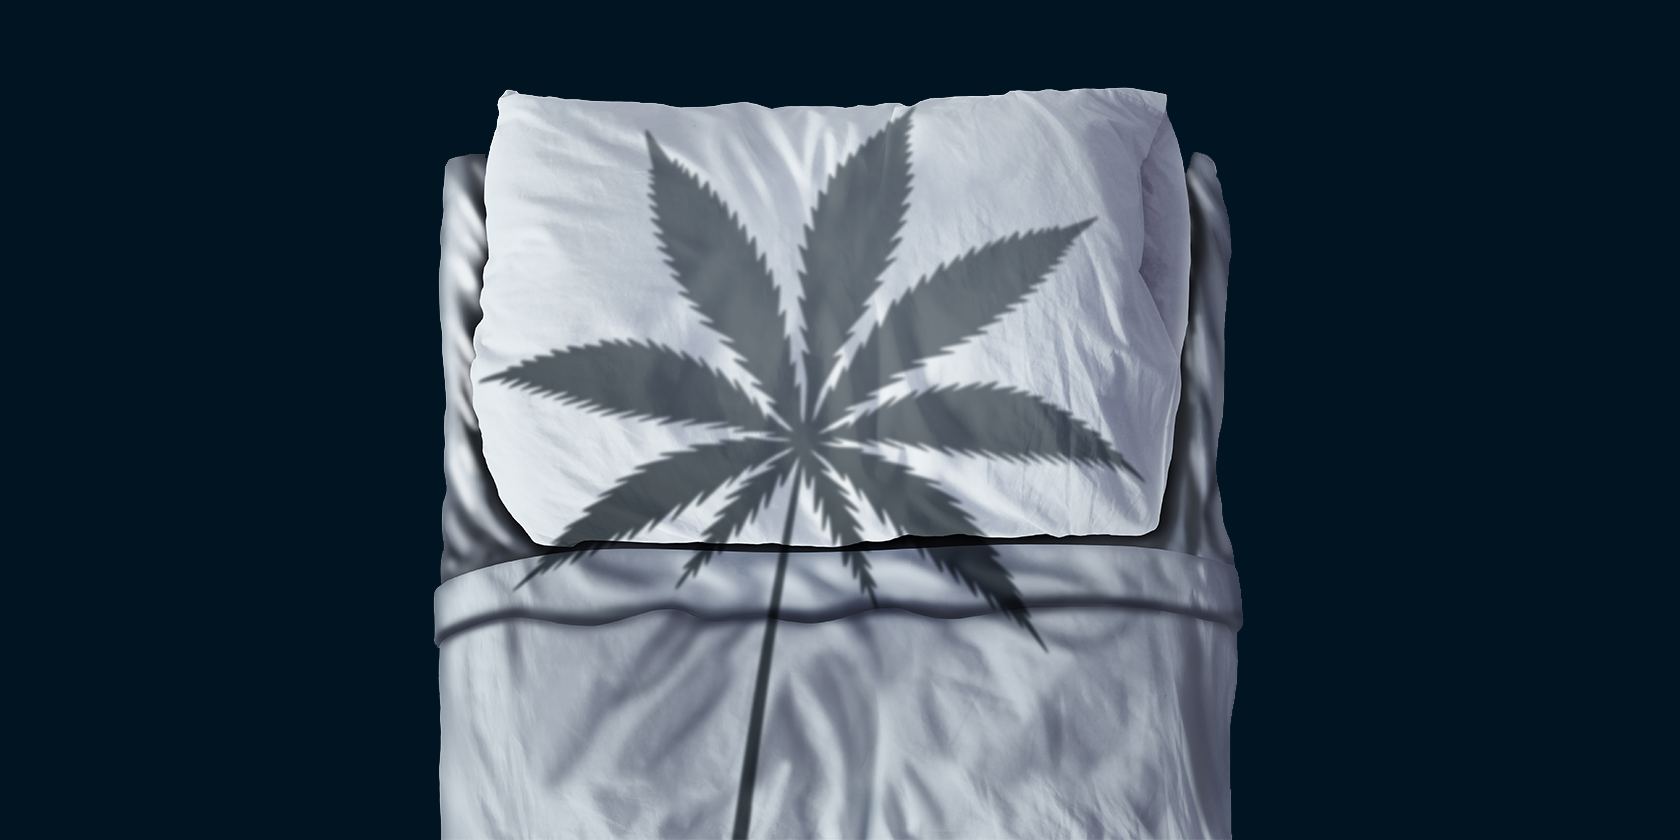 Cannabis and Self-Care: What Are the Best Strains for Anxiety and Sleep?